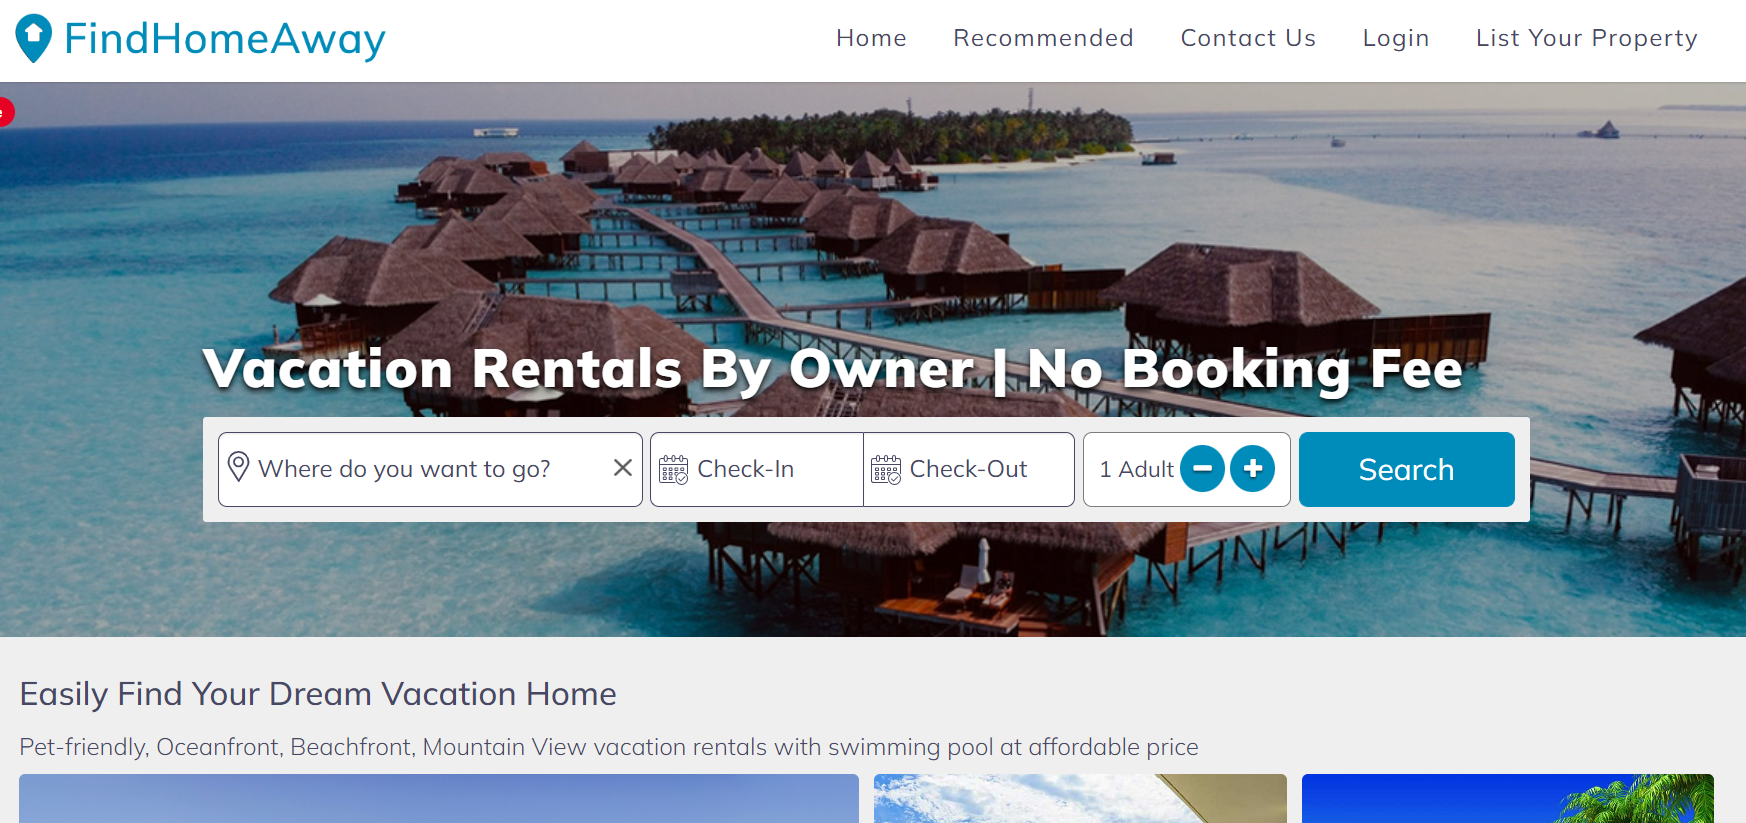 Generating Business from Vacation Rentals Website - Find Home Away